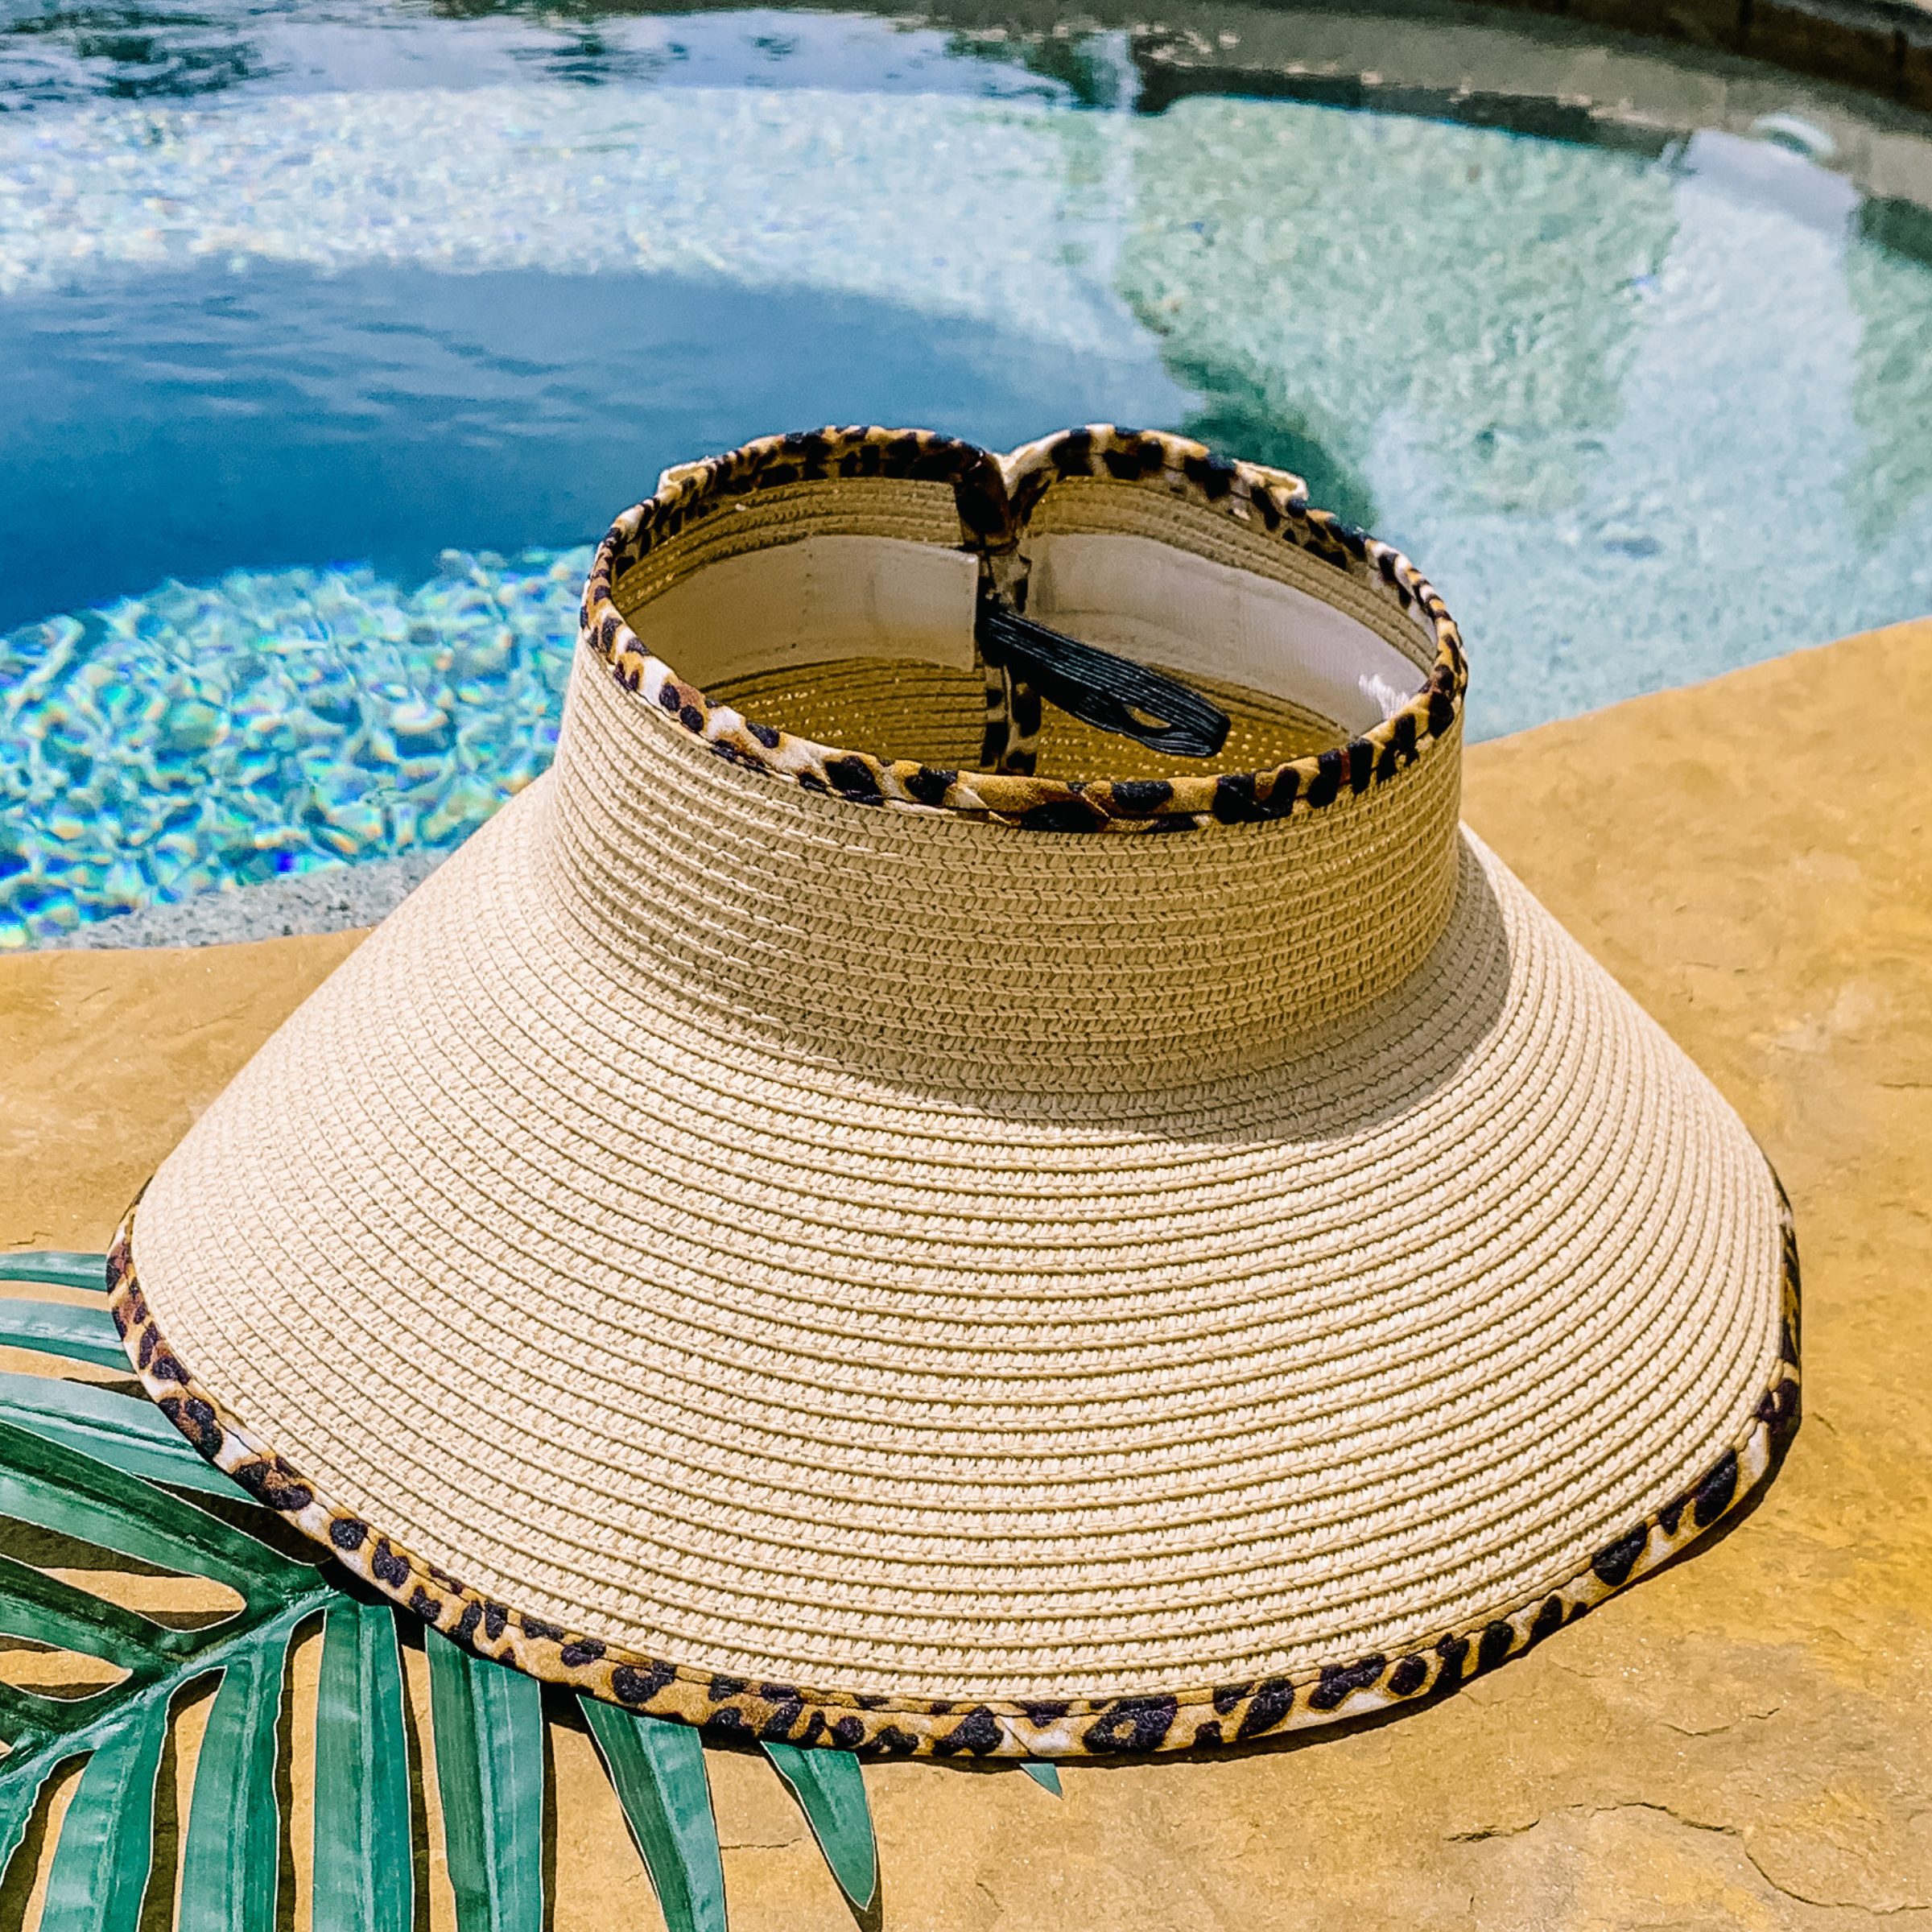 Natural, woven velcro visor with leopard print trim that is pictured with a green leaf under it. This visor is pictured on a a tan rock in front of a pool.